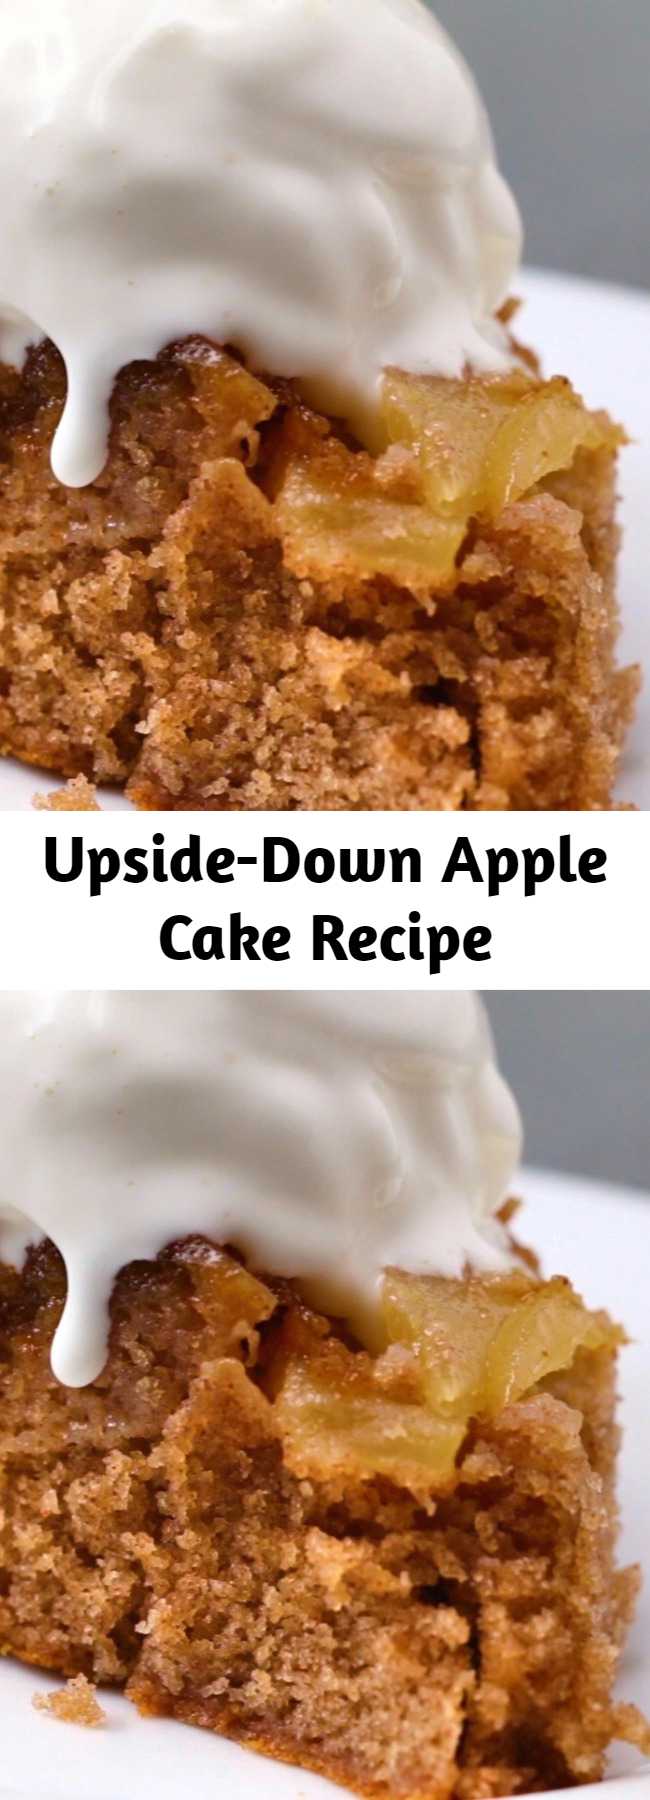 Upside-Down Apple Cake Recipe - This apple cake is absolutely scrumptious! Especially with a side of vanilla ice cream.